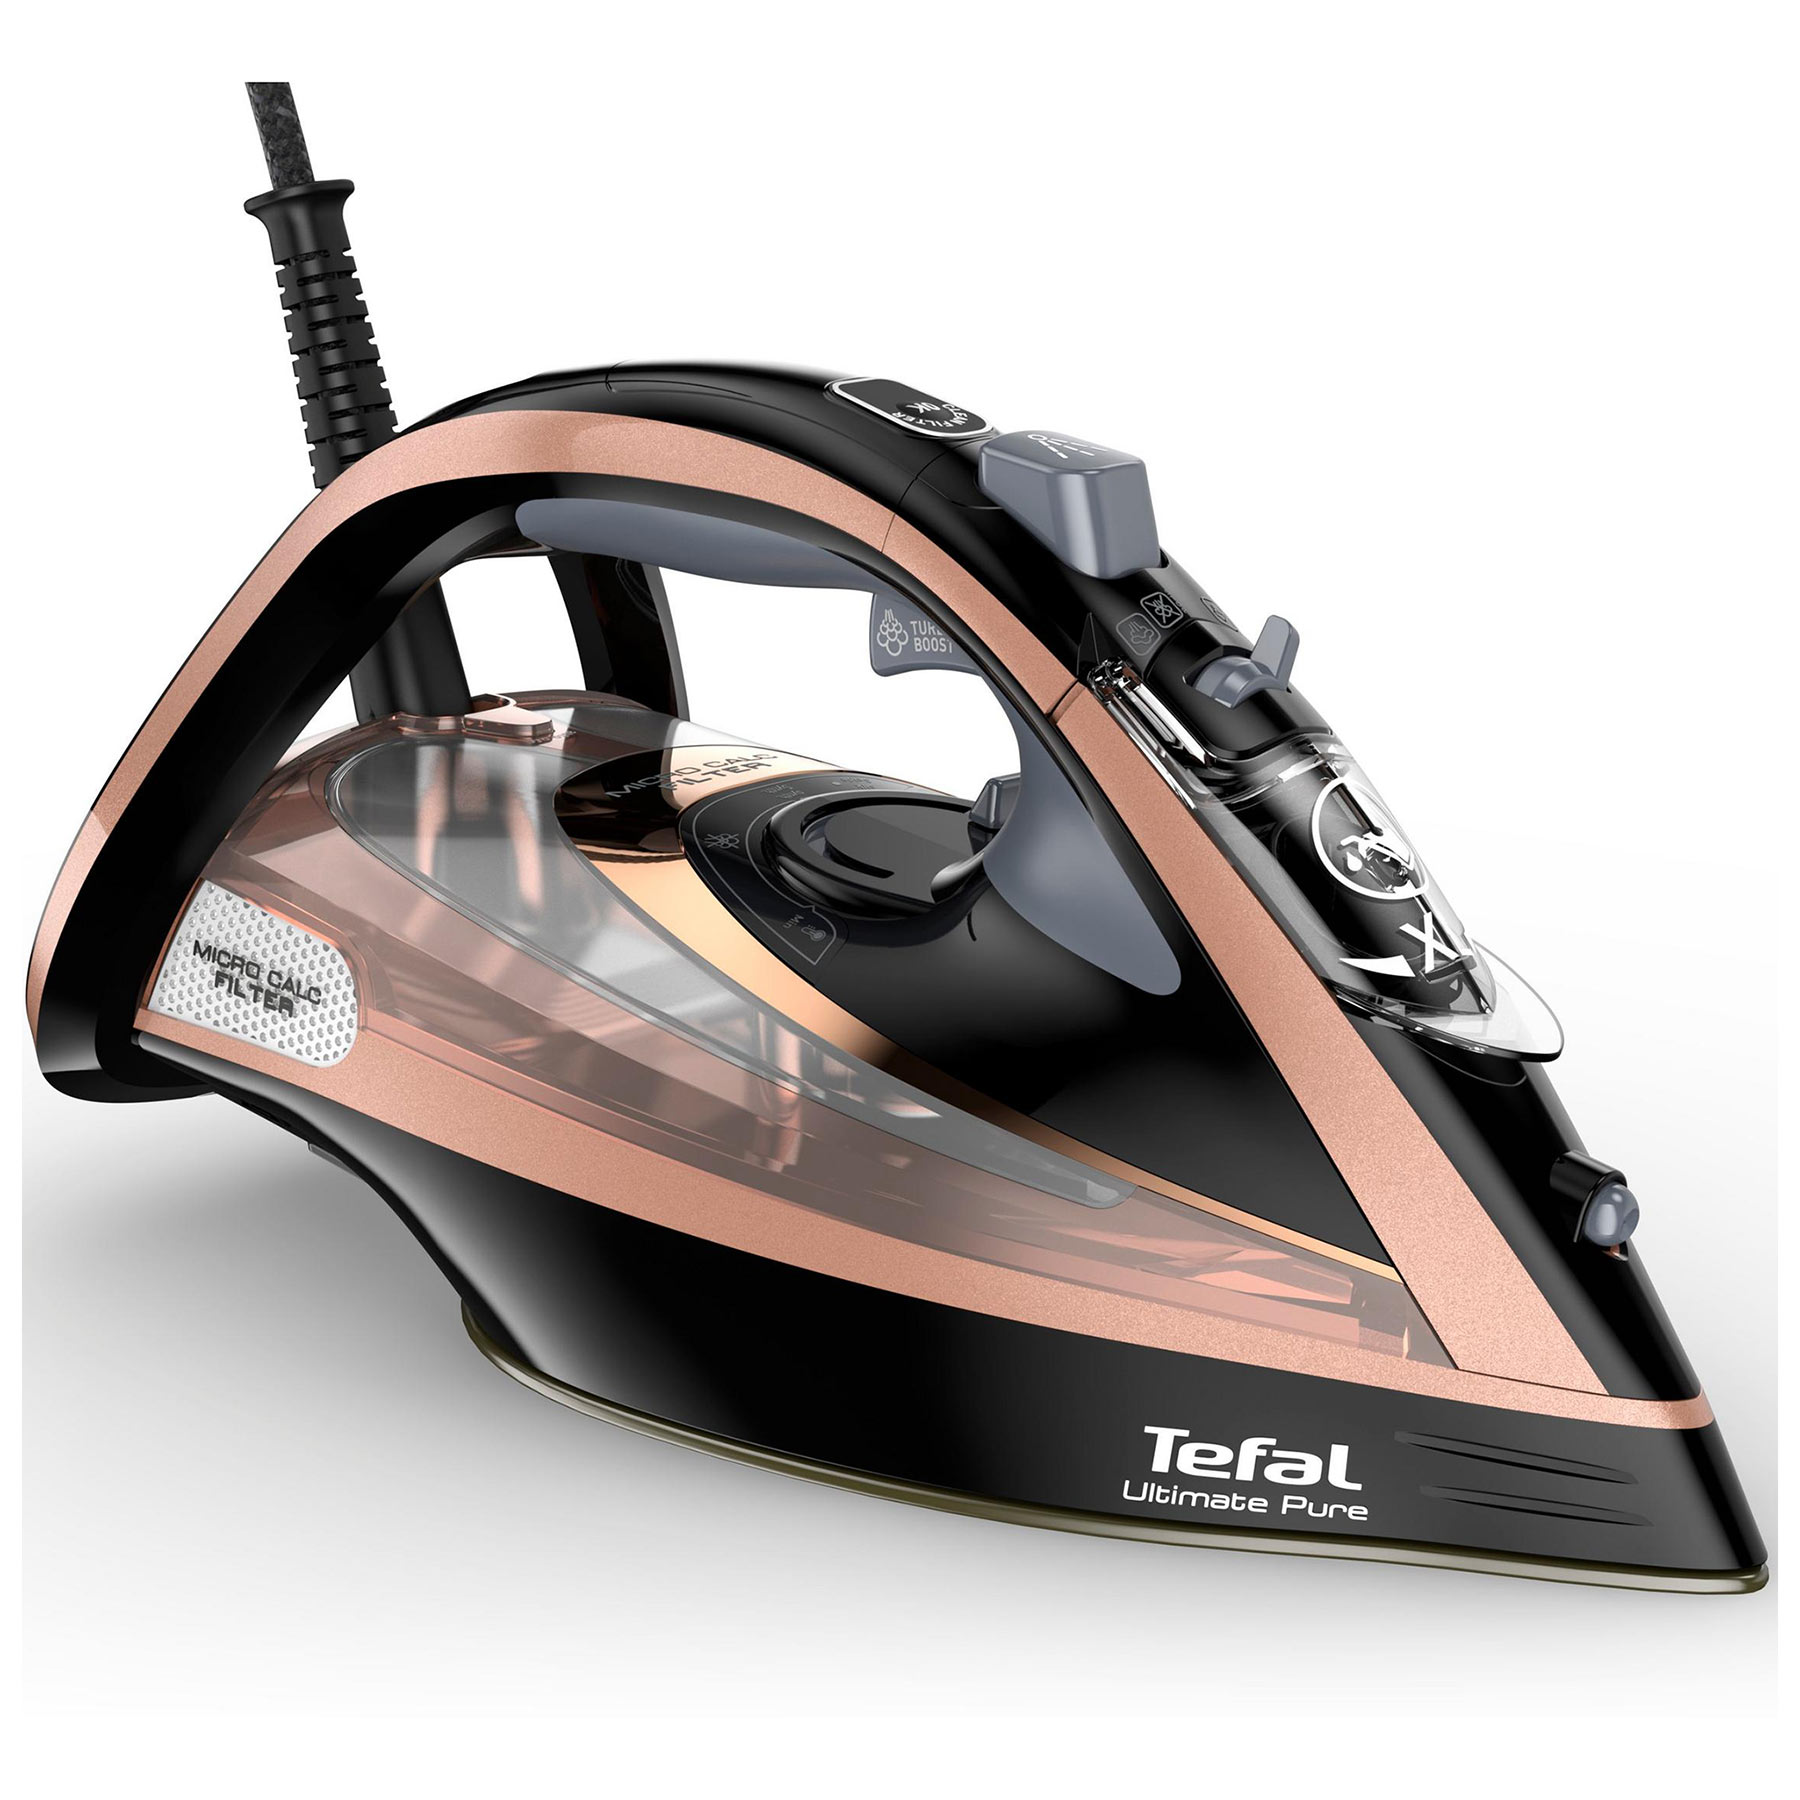 Image of Tefal FV9845G0 Ultimate Pure Steam Iron in Black Rose Gold 3100W